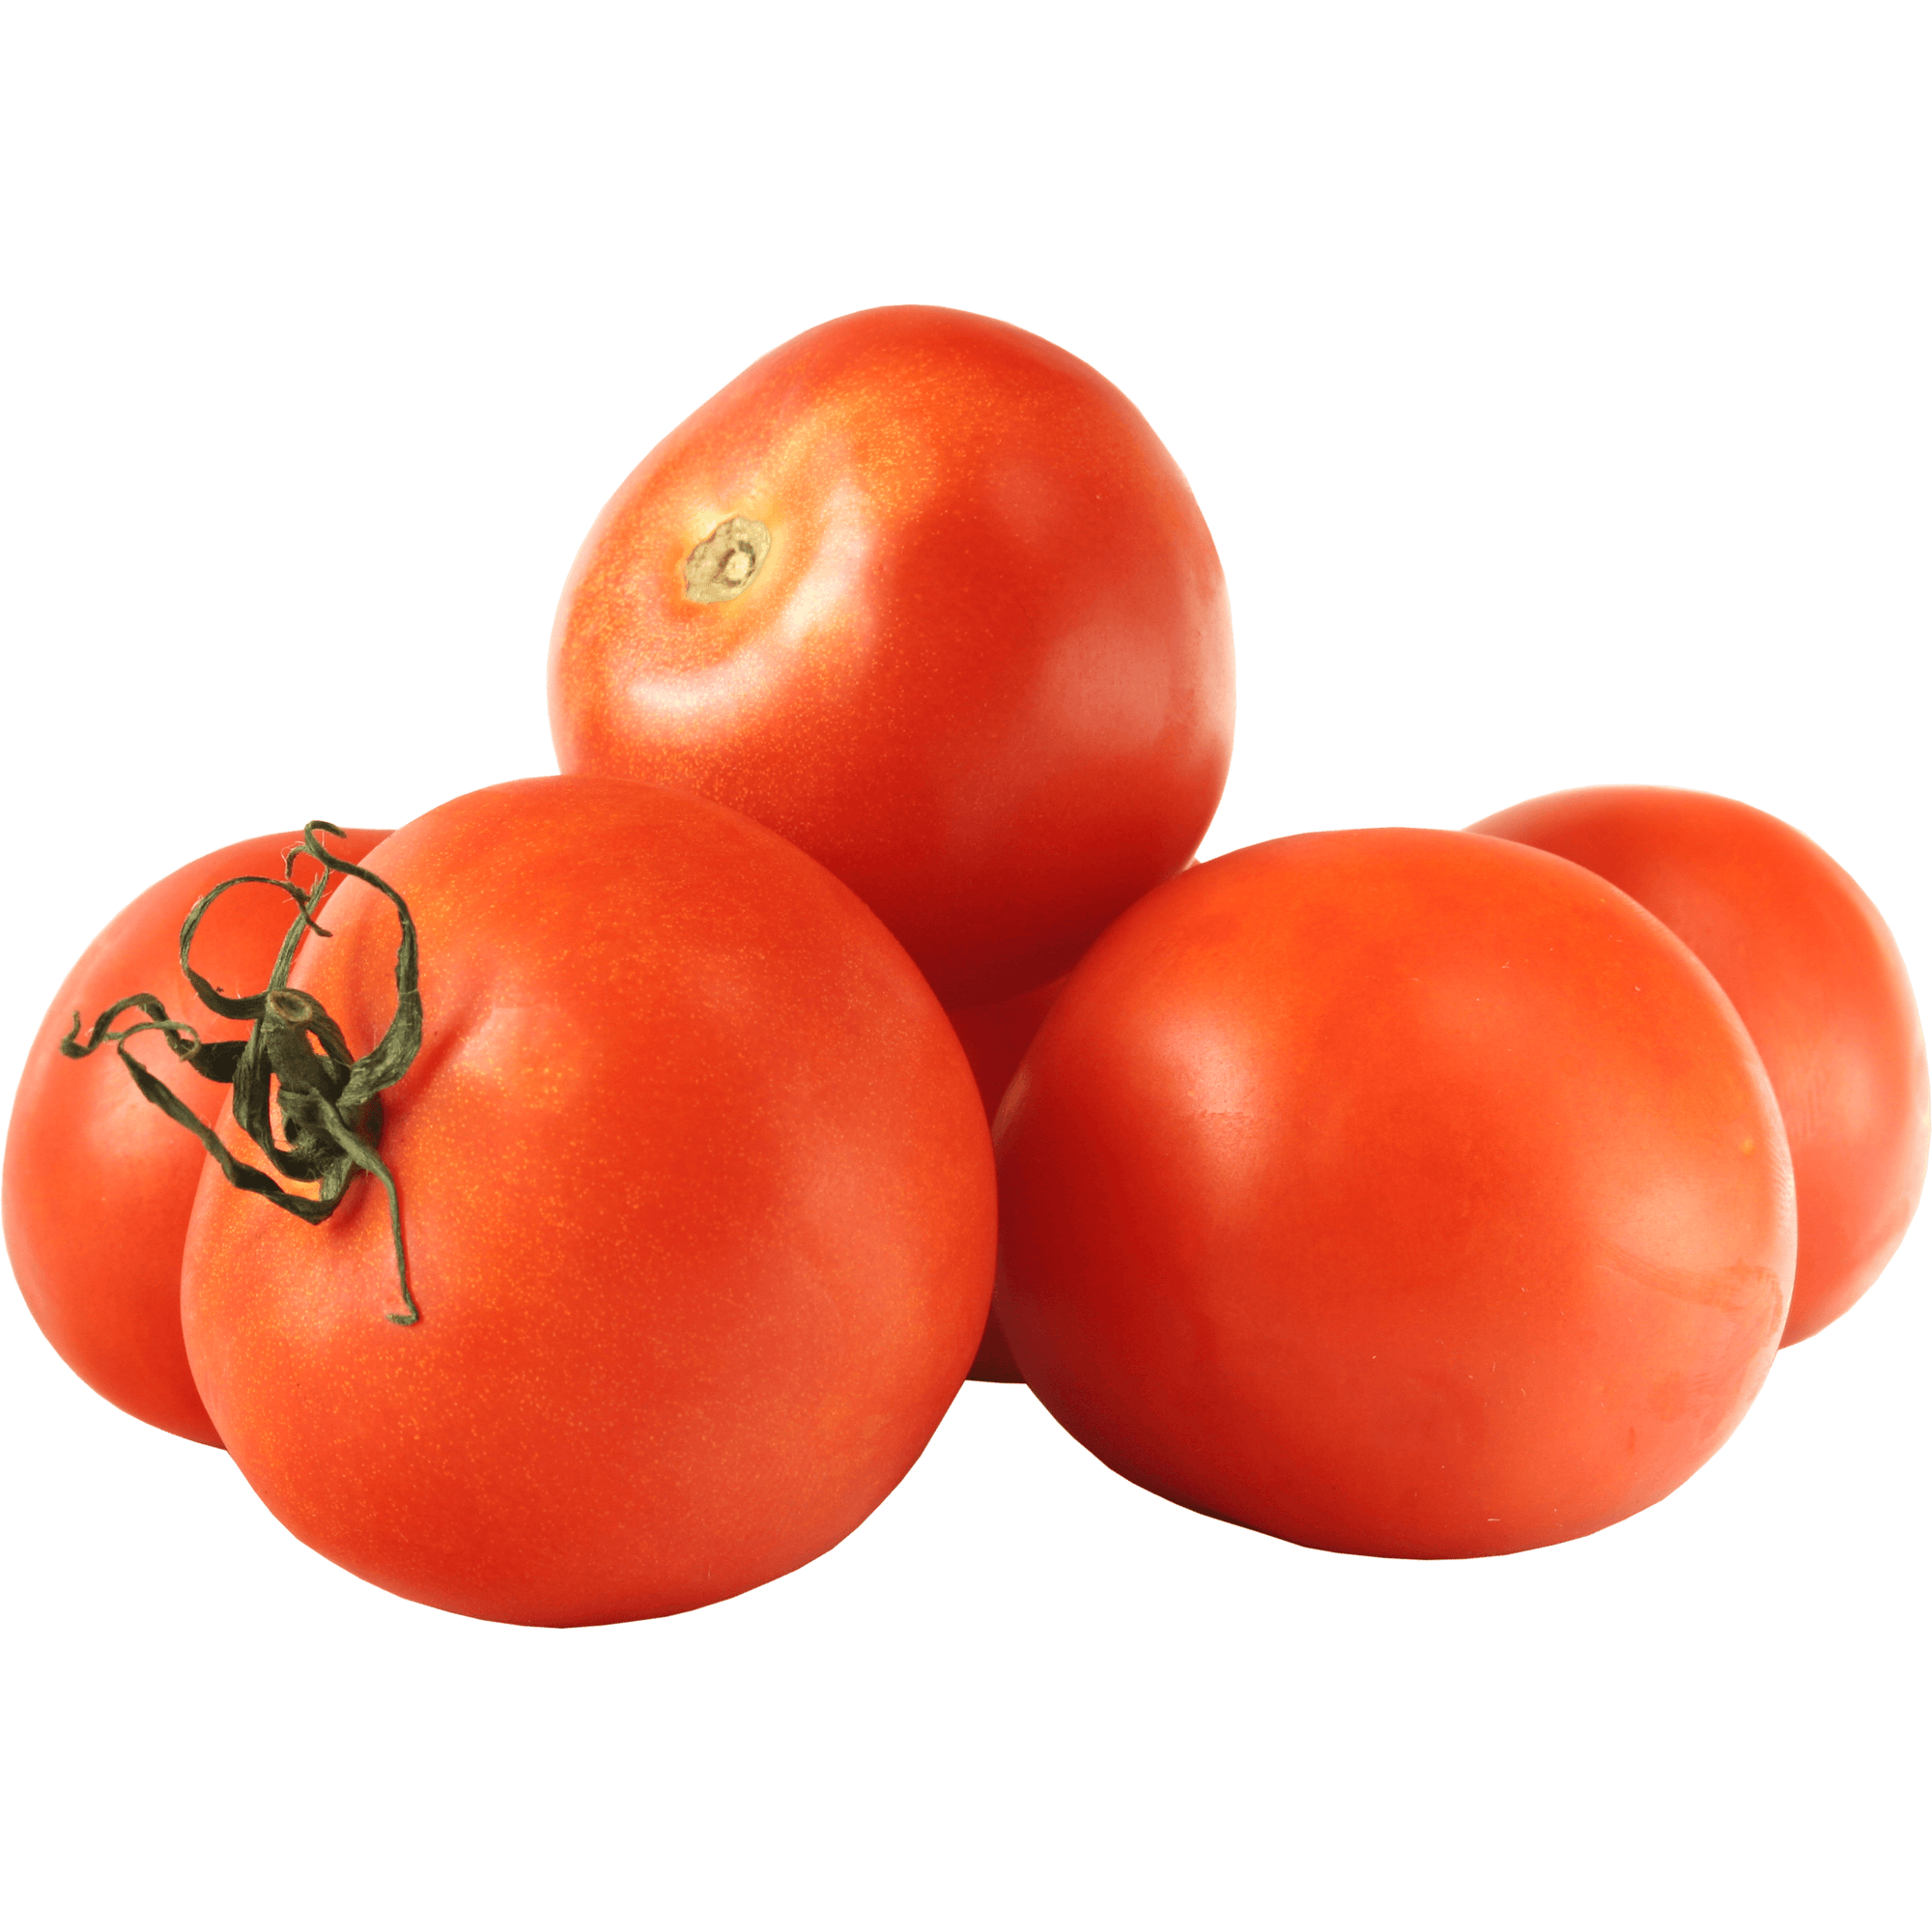 Online - Tomatoes (kg) (Tw-Store)